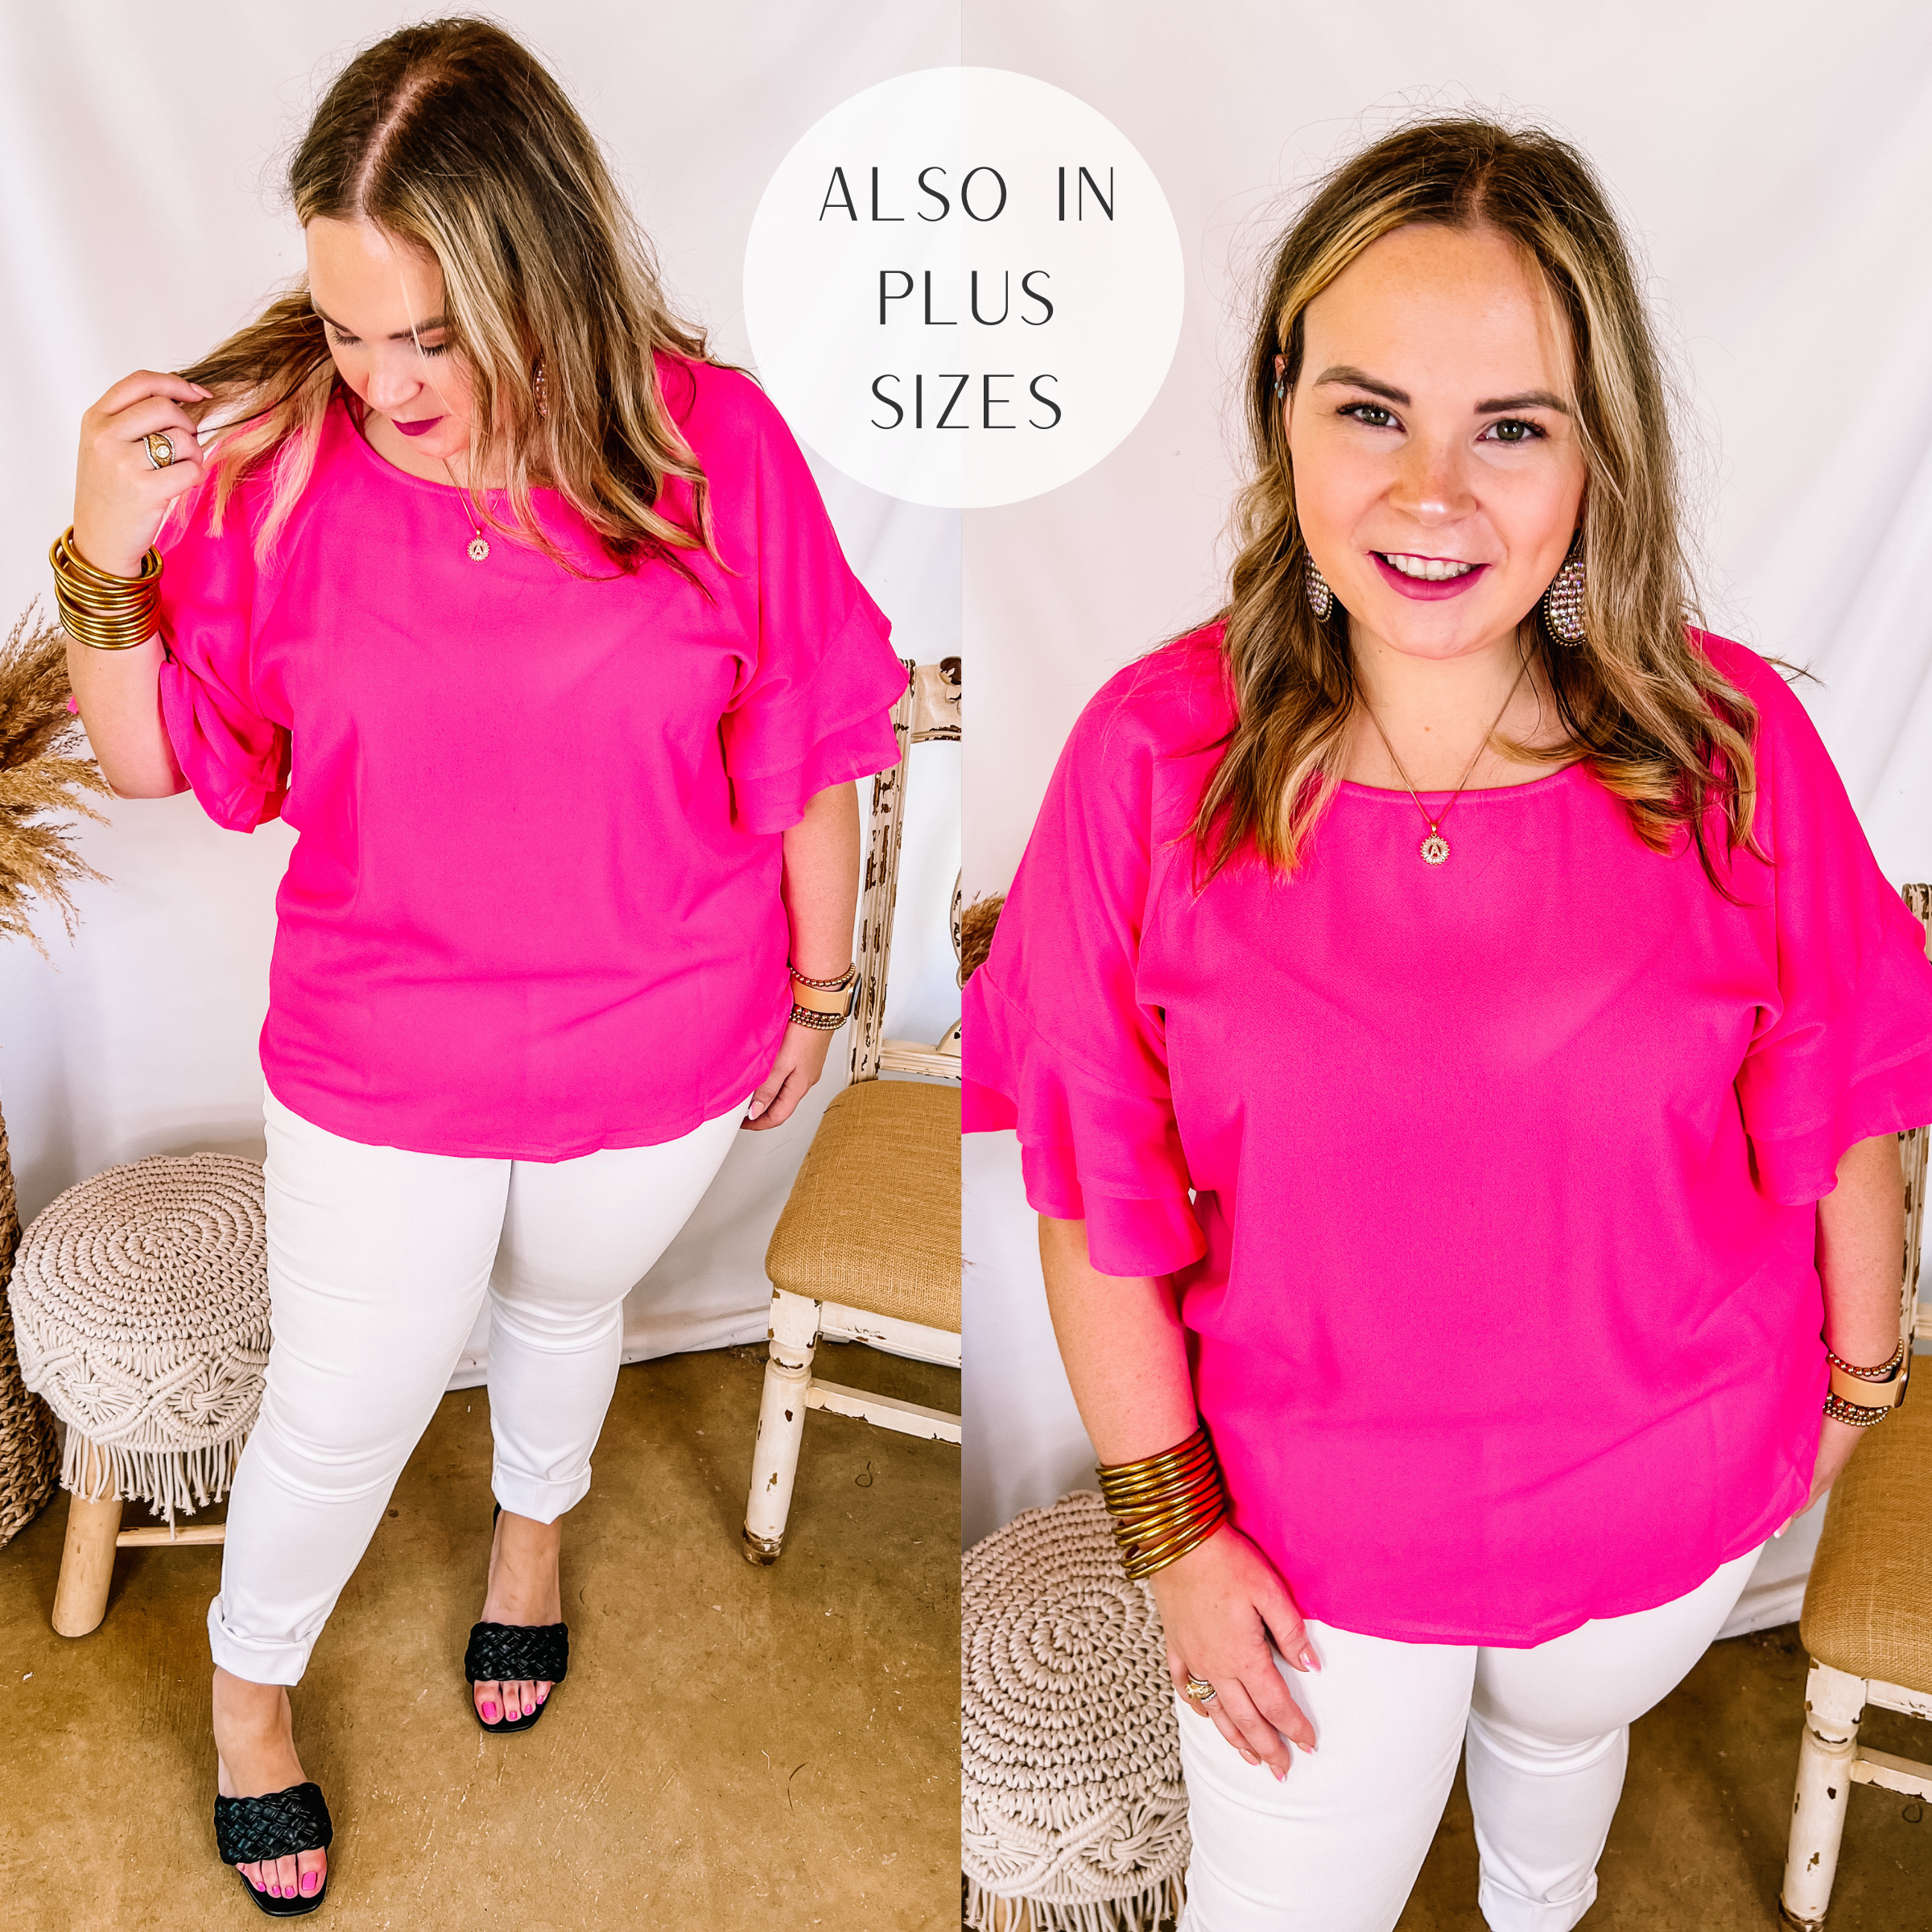 Model is wearing a plus size top that is hot pink with ruffle sleeves. Model has it paired with white skinnies, black heels, and gold jewelry.